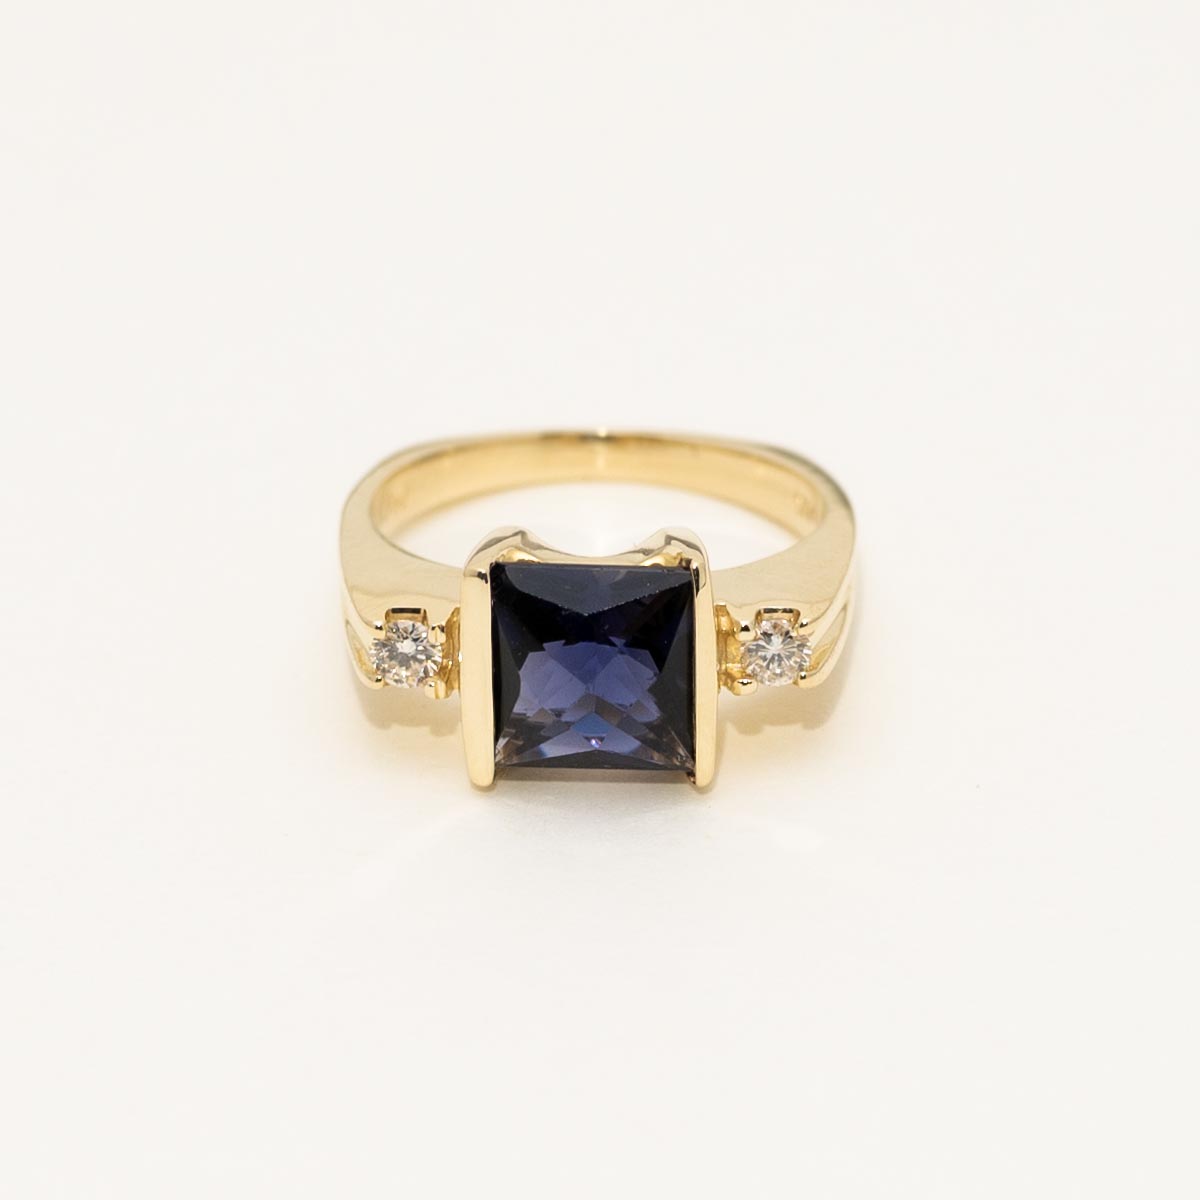 Estate Princess Cut Amethyst Ring in 14kt Yellow Gold with Diamonds (1/10ct tw)